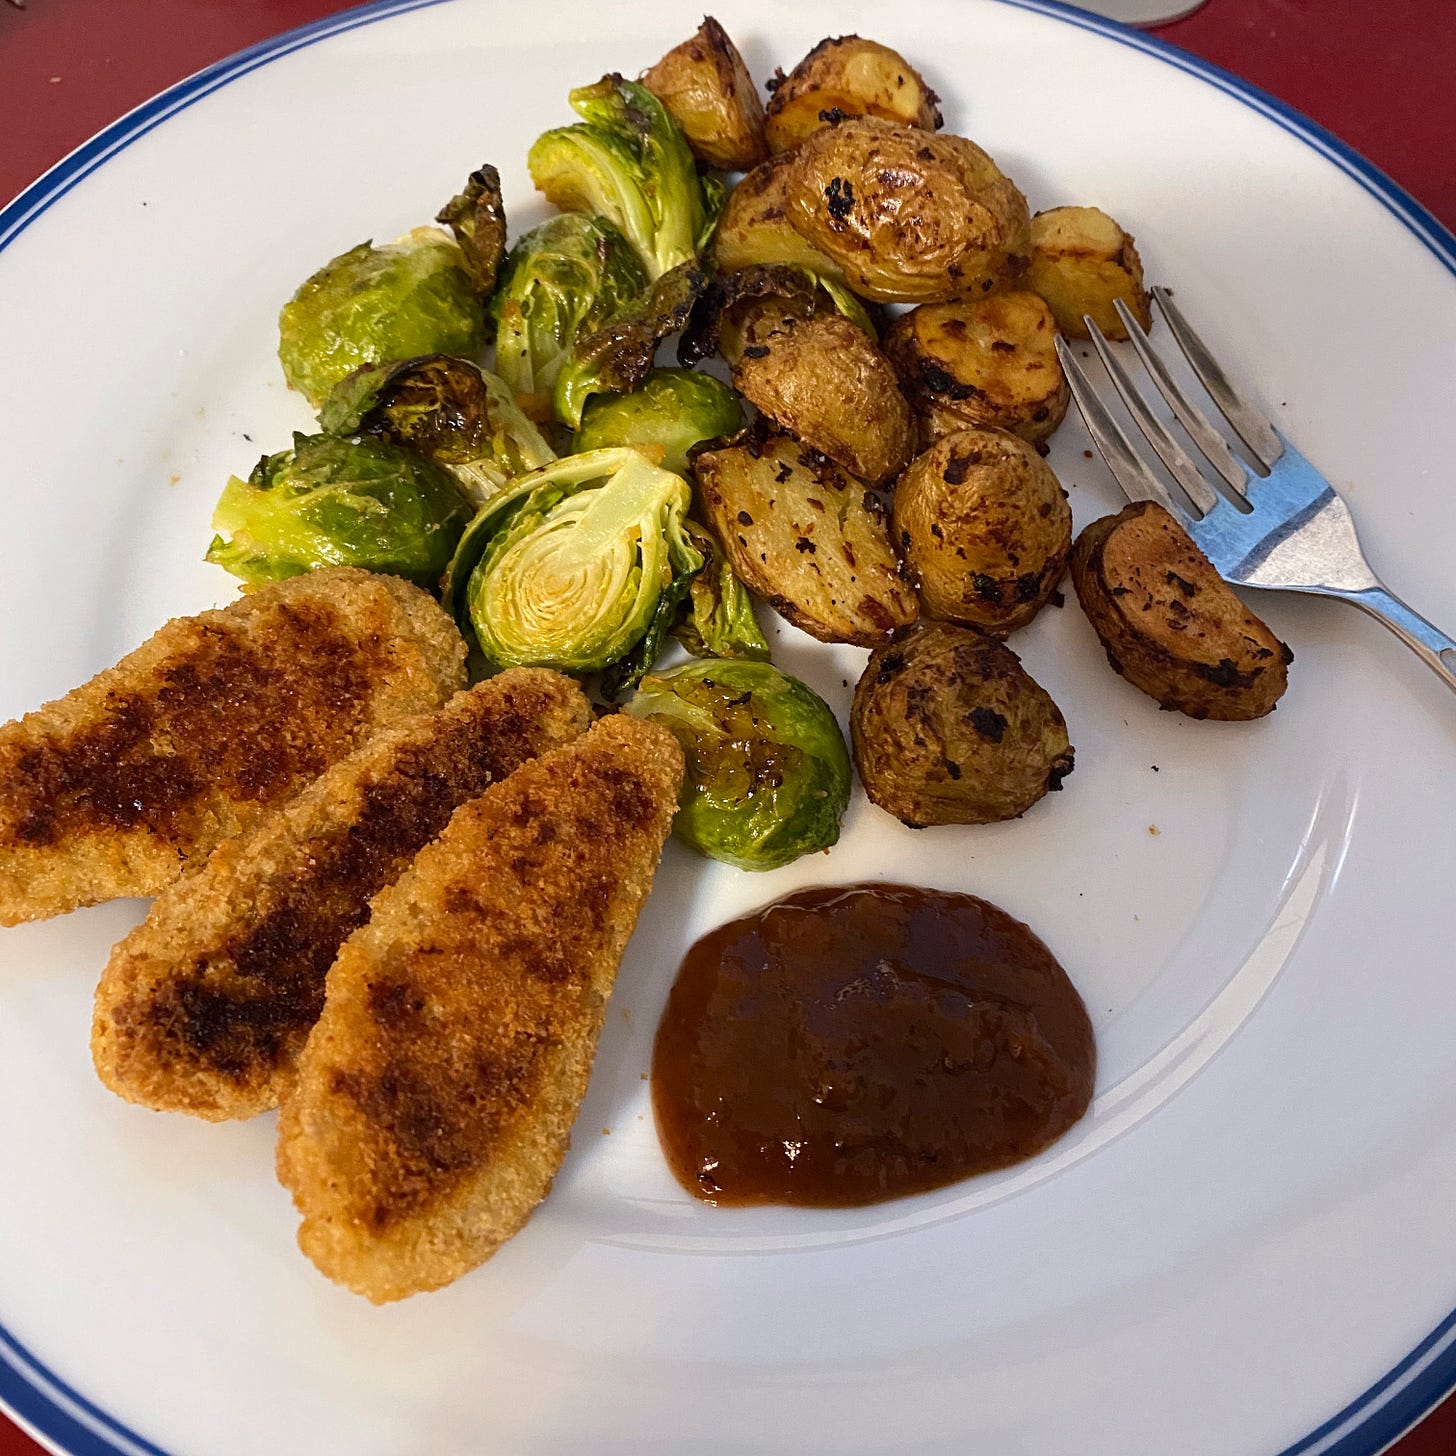 On a white dinner plate with a blue rim, three toasted vegan nuggets next to a splotch of dark brown plum sauce. Behind the nuggets are piles of roasted potatoes and brussels sprouts. A fork rests at the right edge of the plate.